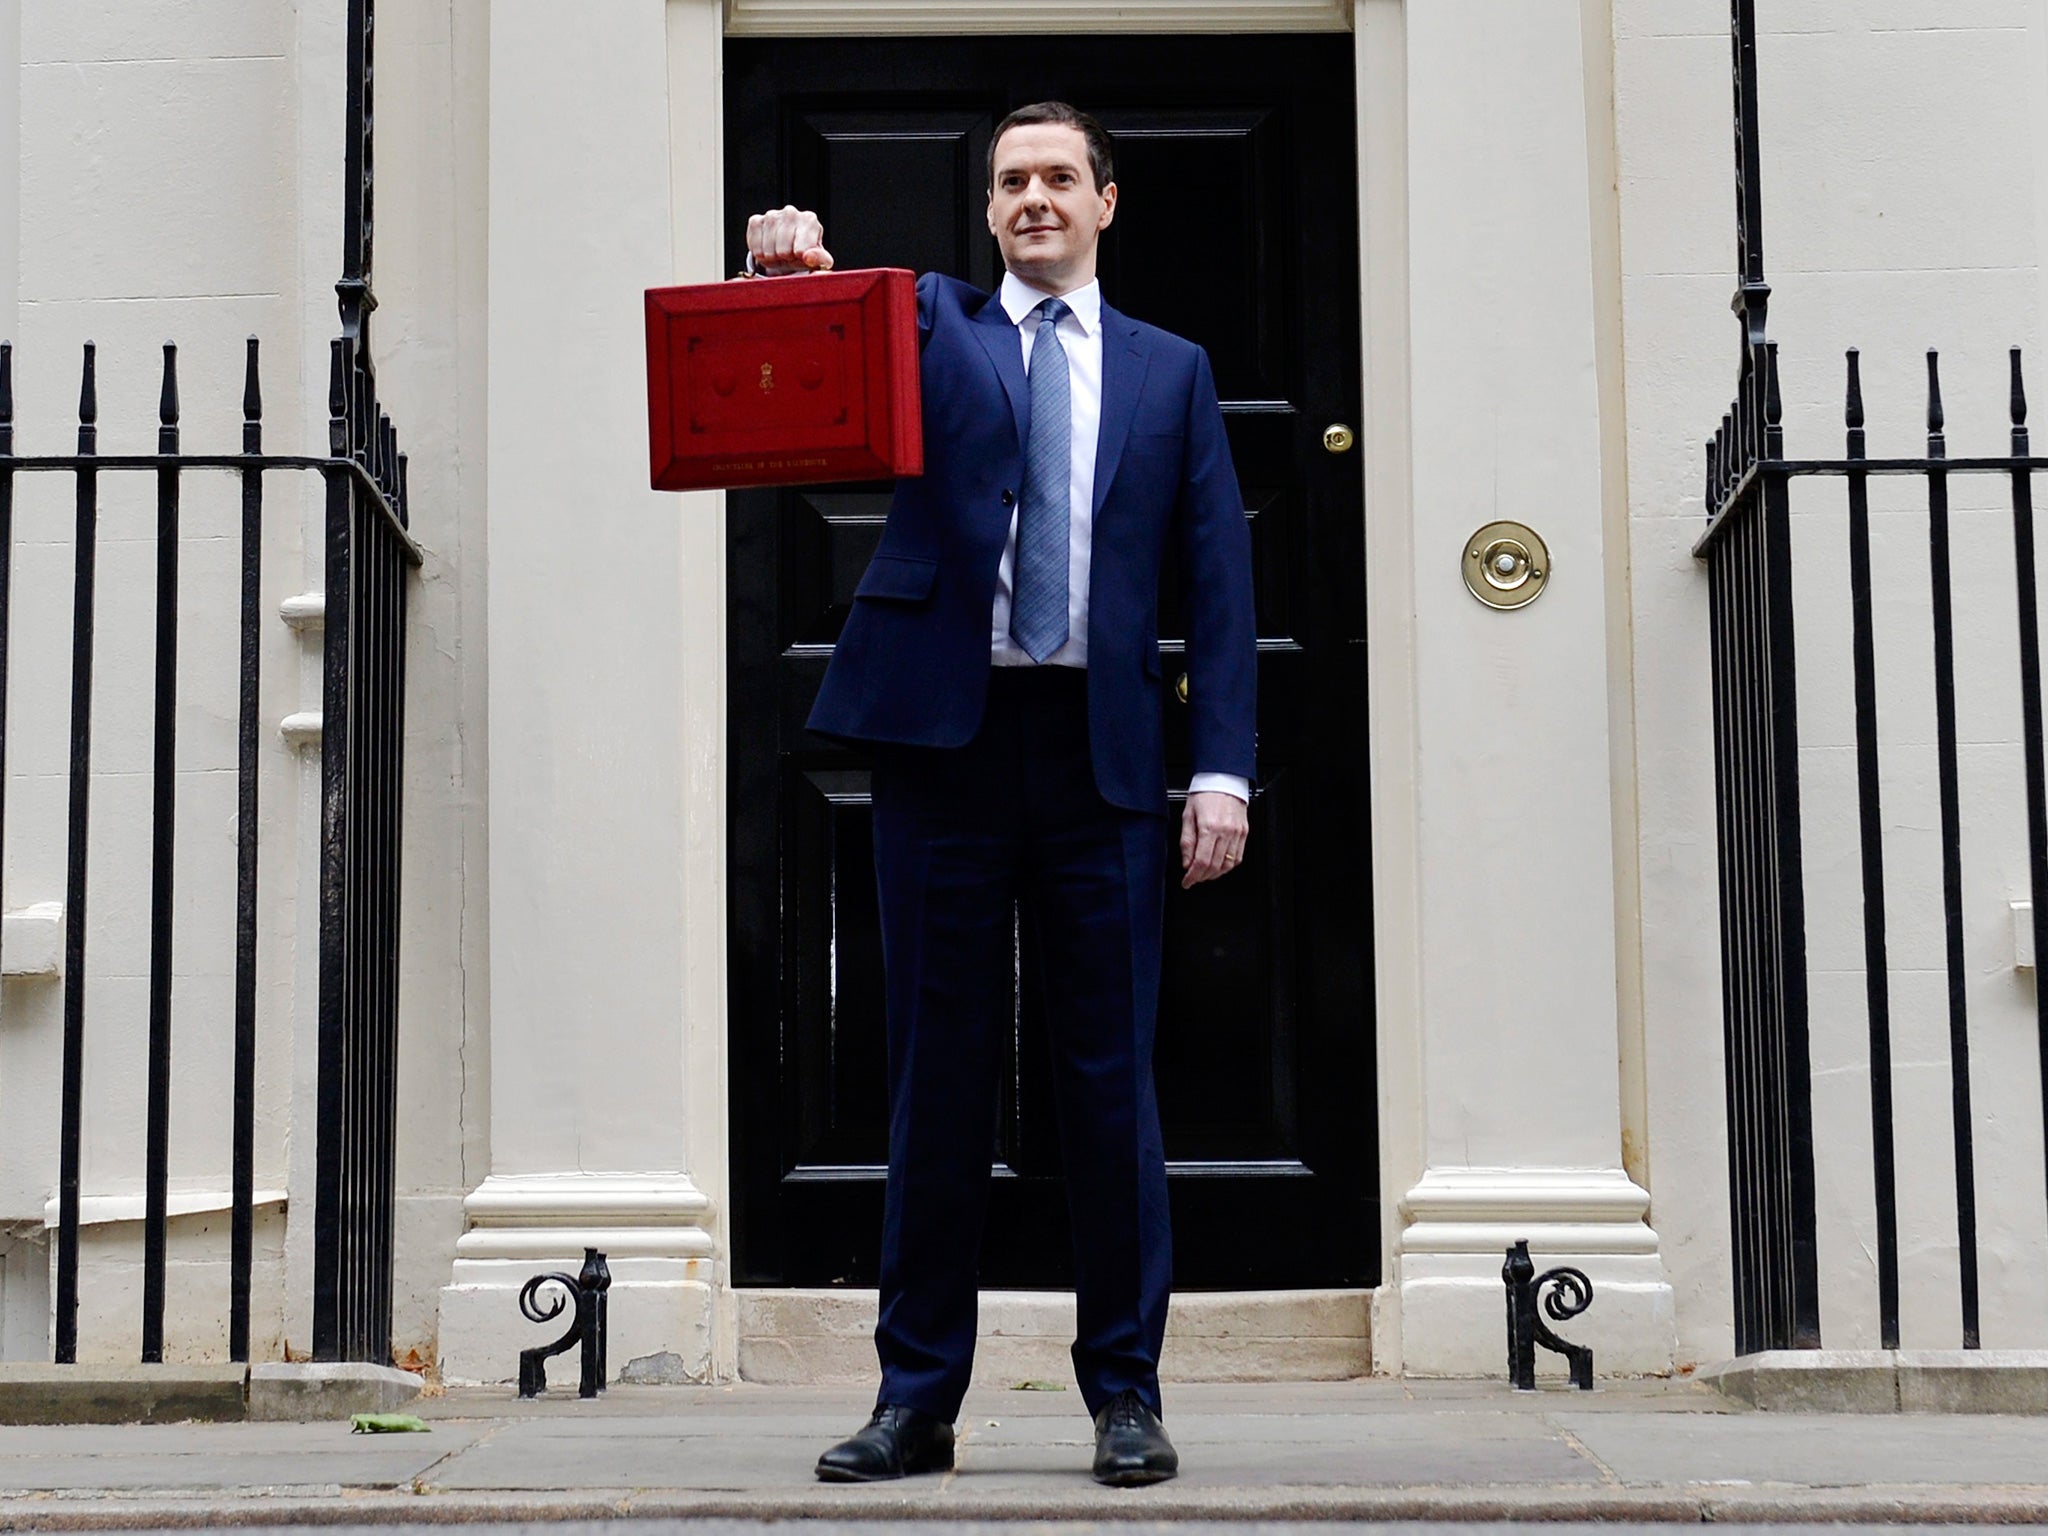 George Osborne holds up the red briefcase outside No 11 Downing Street